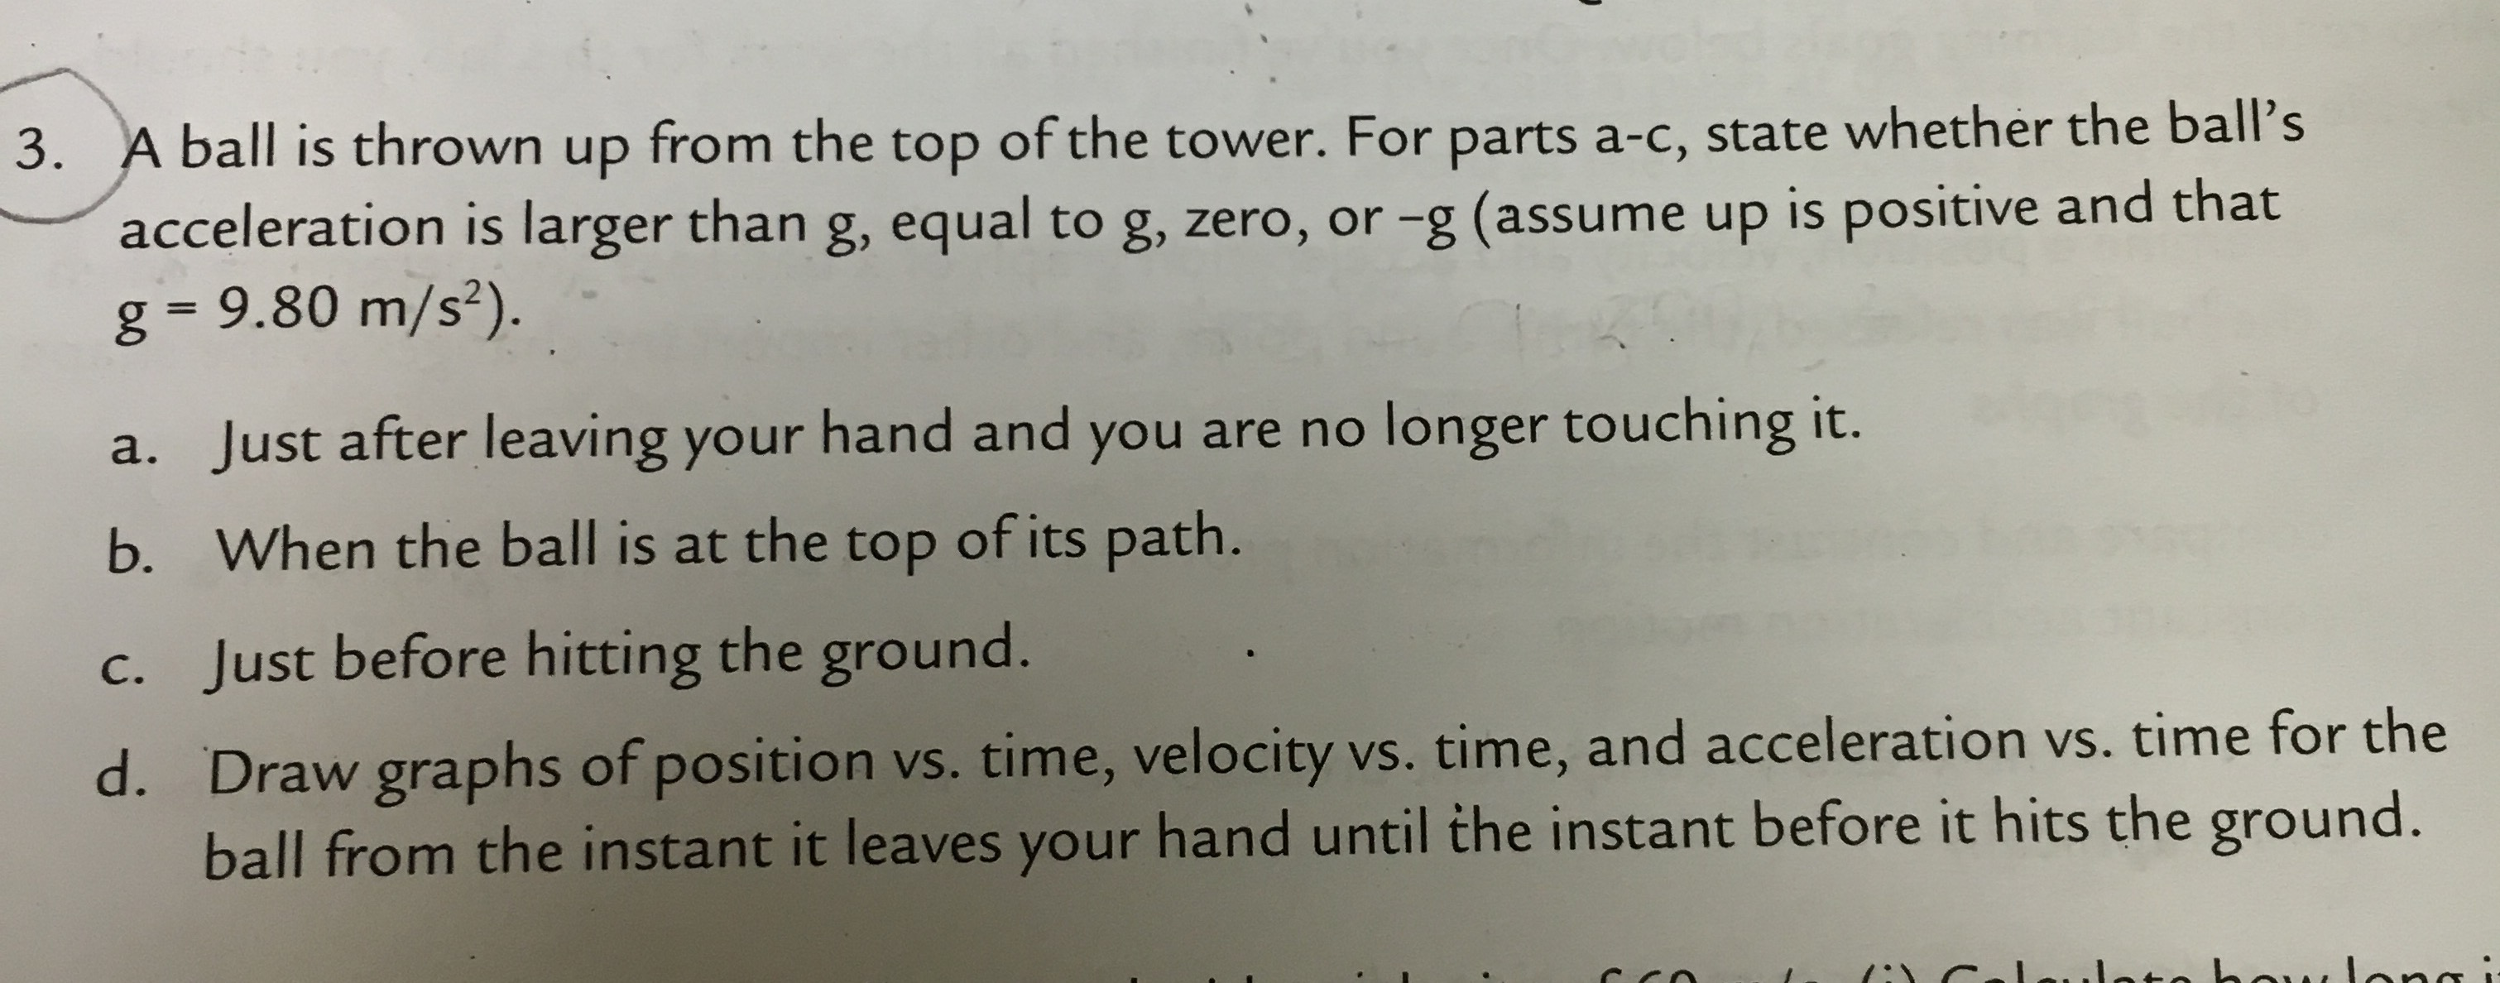 A ball is thrown up from the top of the tower. For parts a-c, state whether the balls acceleration is larger than g, equal to g, zero, or -g (assume up is positive and that g = 9.80 m/s^2). Just after leaving your hand and you are no longer touching it. When the ball is at the top of its path. Just before hitting the ground. Draw graphs of position vs. time, velocity vs. time, and acceleration vs. time for the ball from the instant it leaves your hand until the instant before it hits the ground.